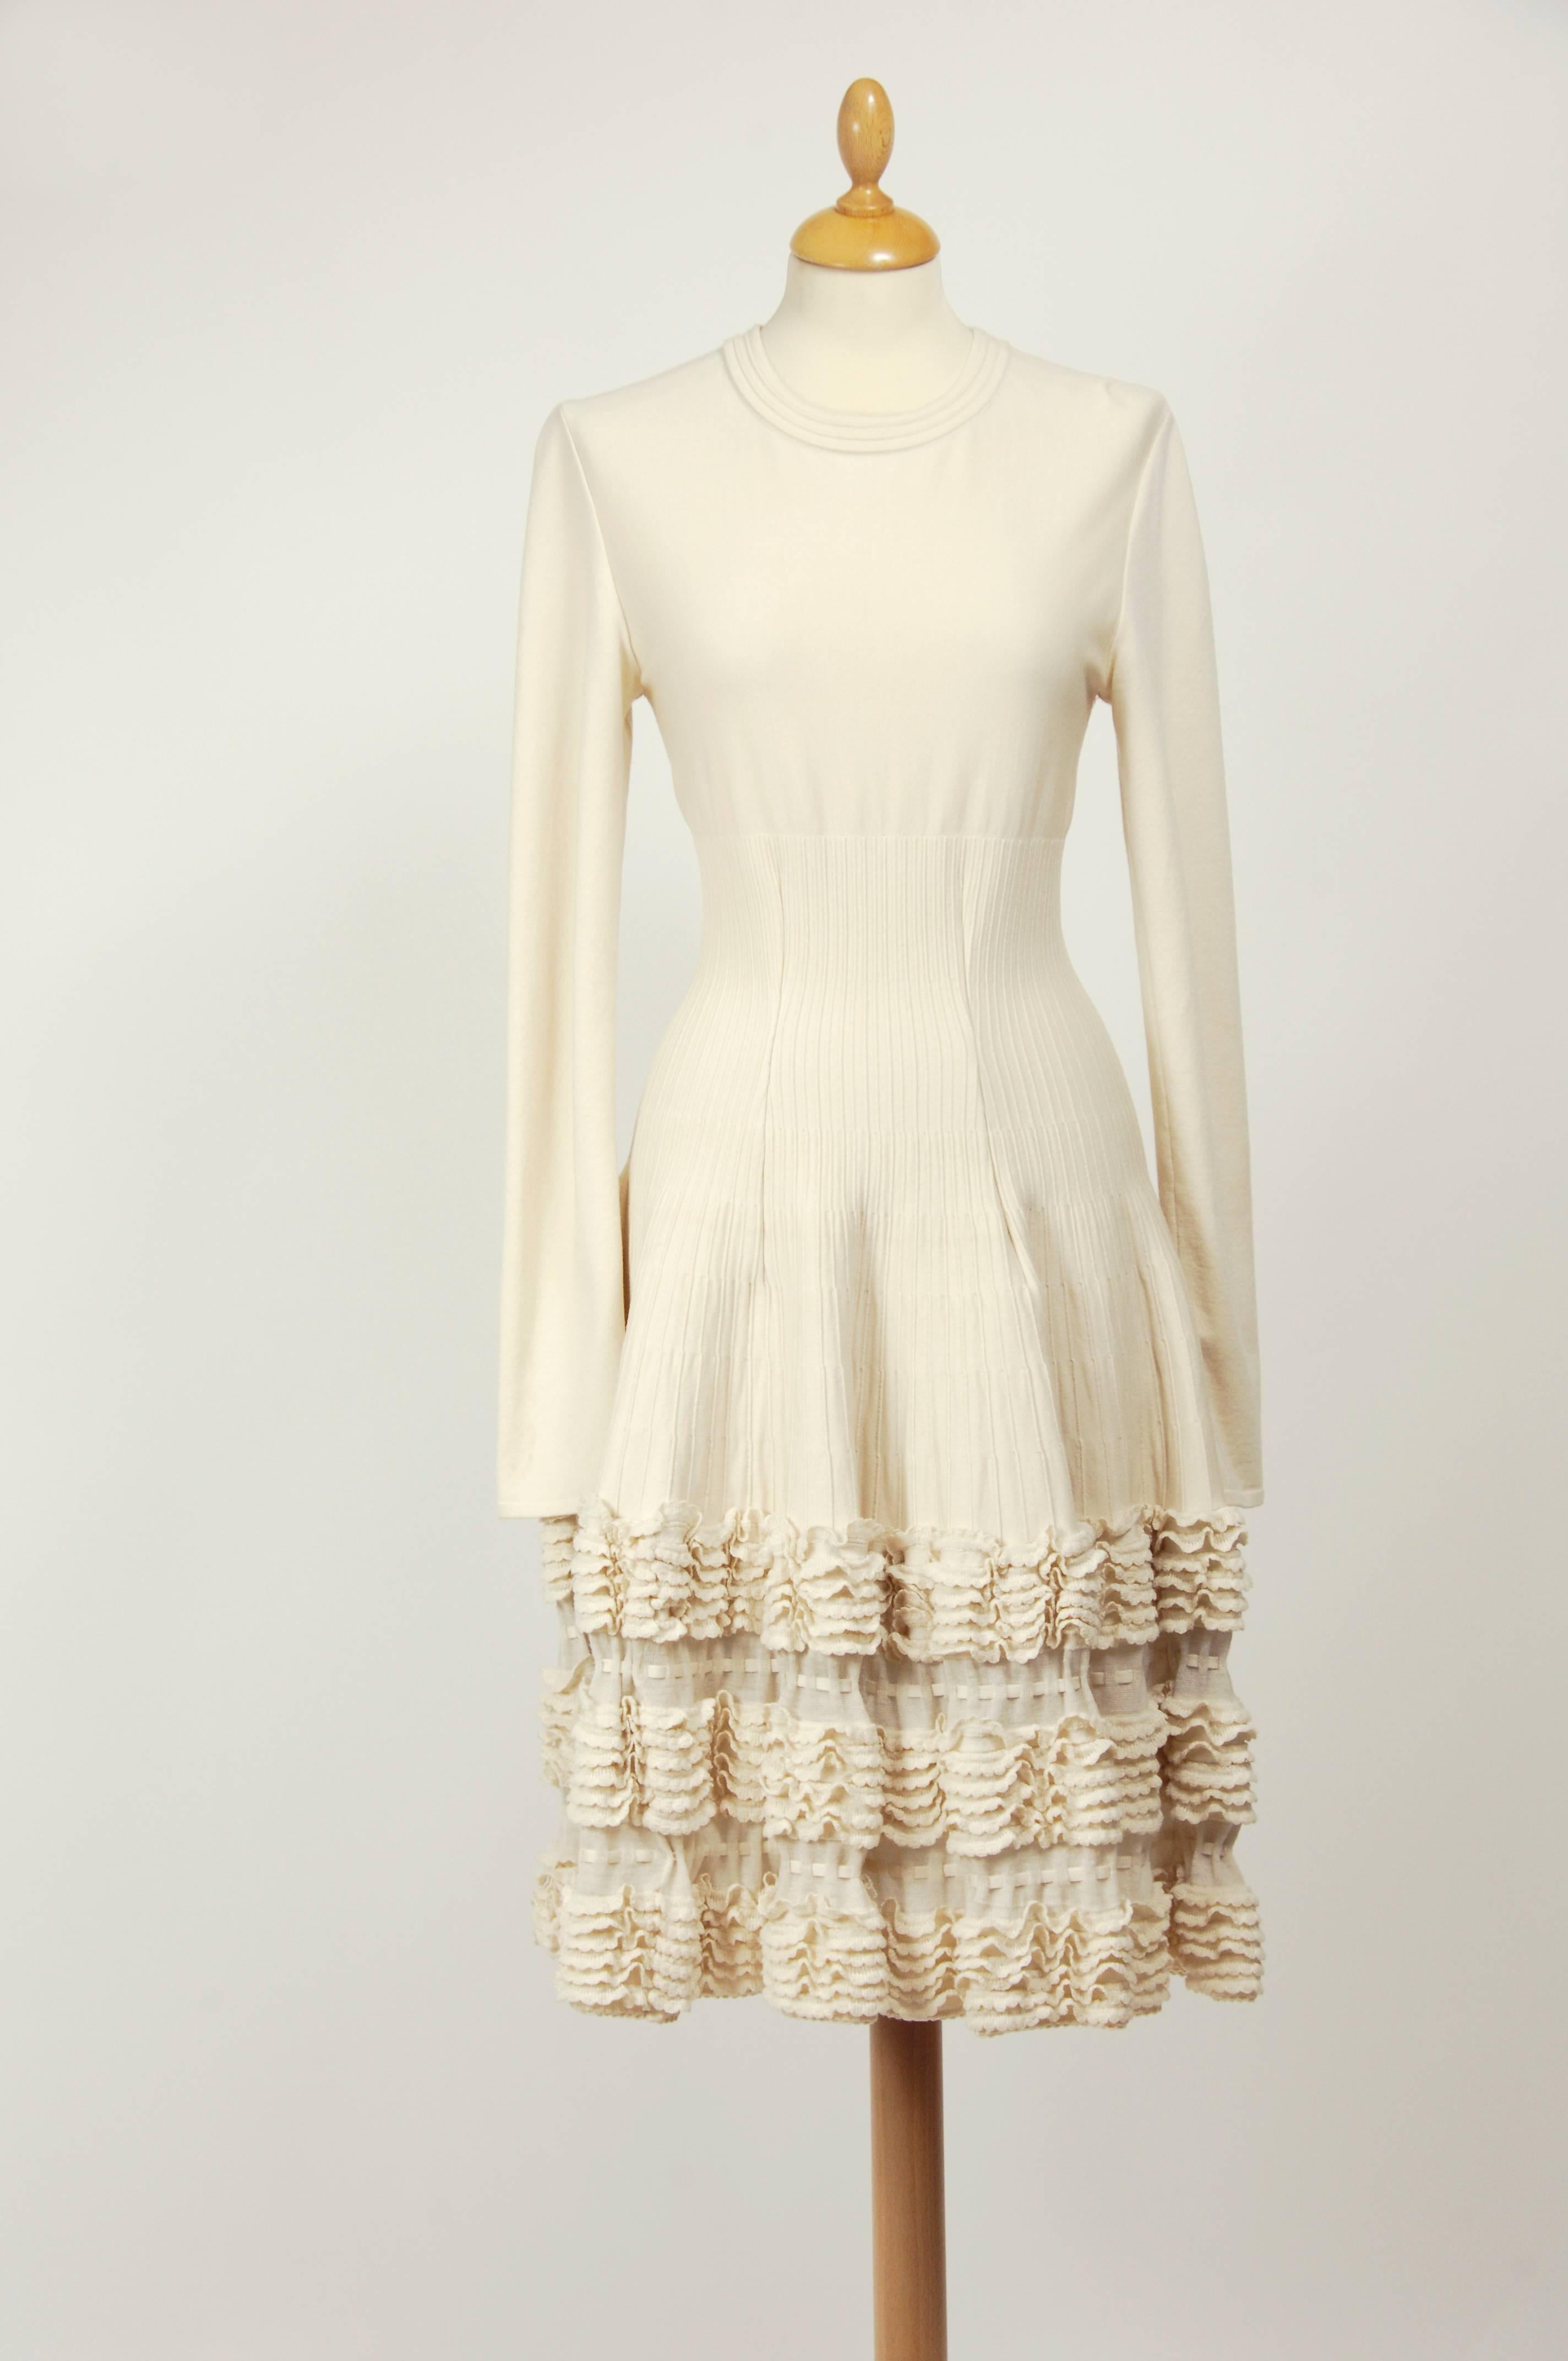 This gorgeous Azzedine Alaïa dress is in a cream wool knit stretch fabric and has typical Alaia's signature body. It has ruffle details and back zip closure.

Measurements (unstretched) :
Label size 38 Italian
Estimated size S
Shoulder       17